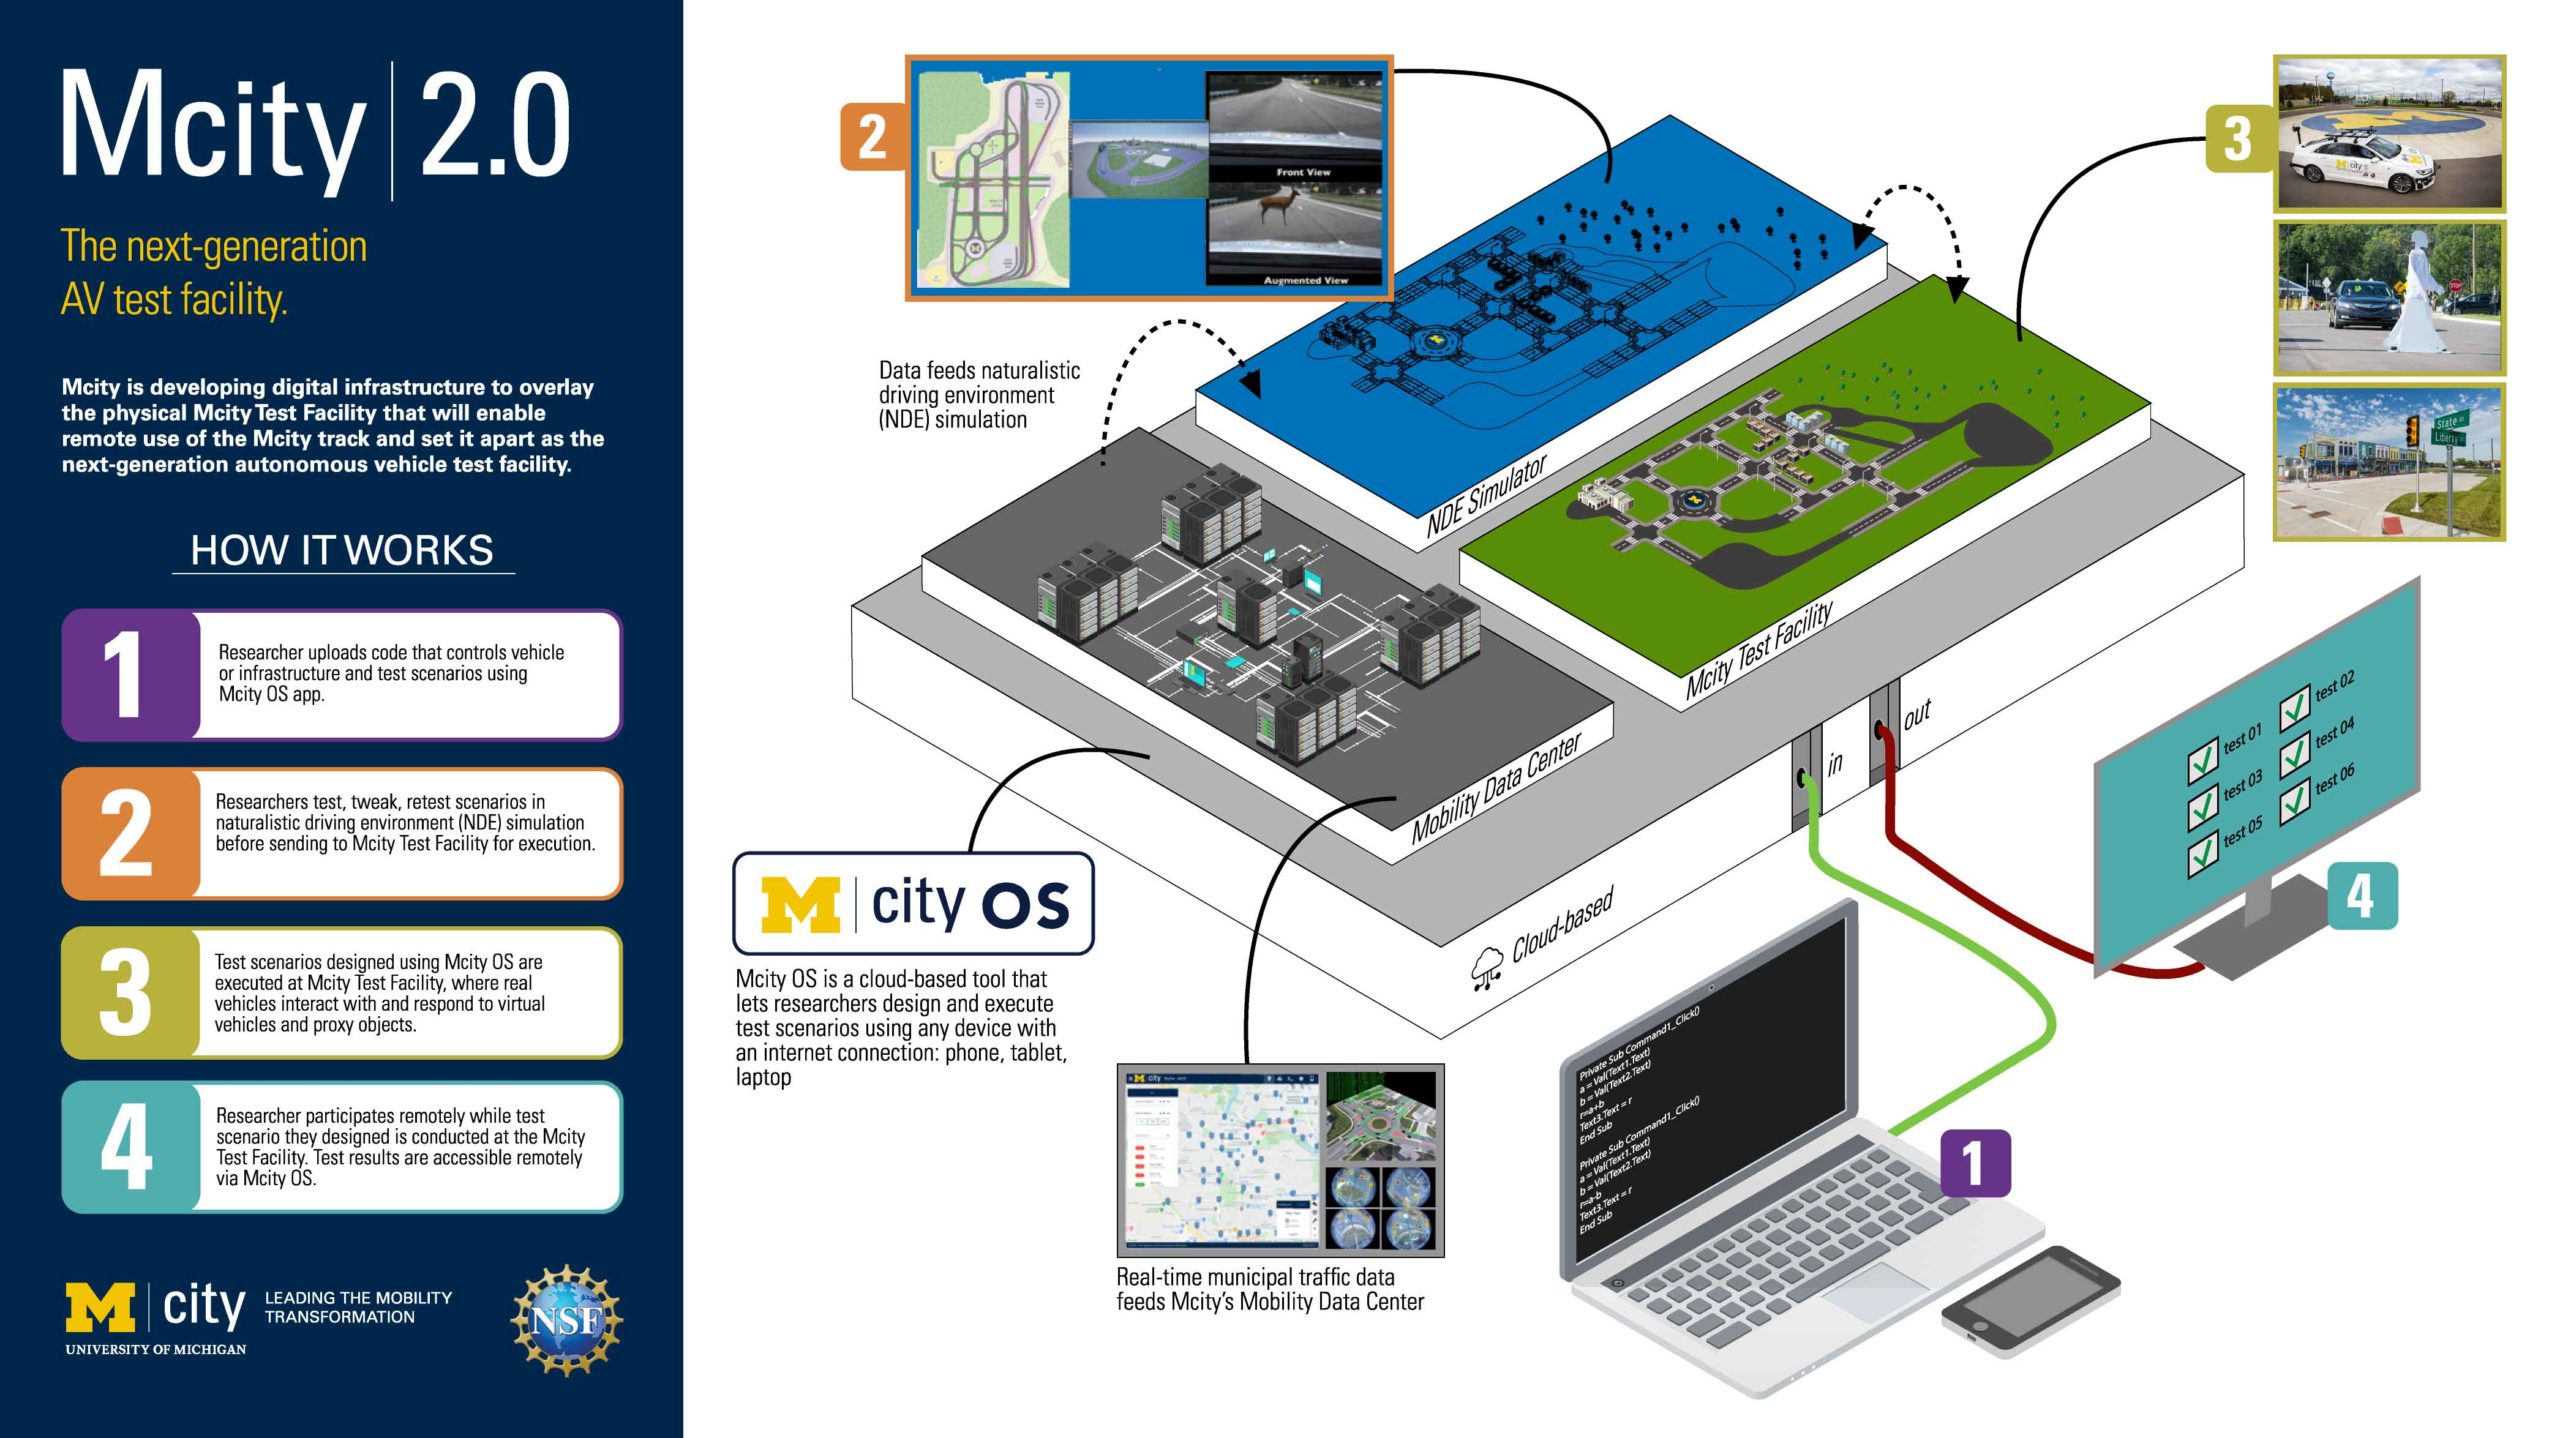 Mcity 2.0 Diagram which features the 4 pillars to the platform